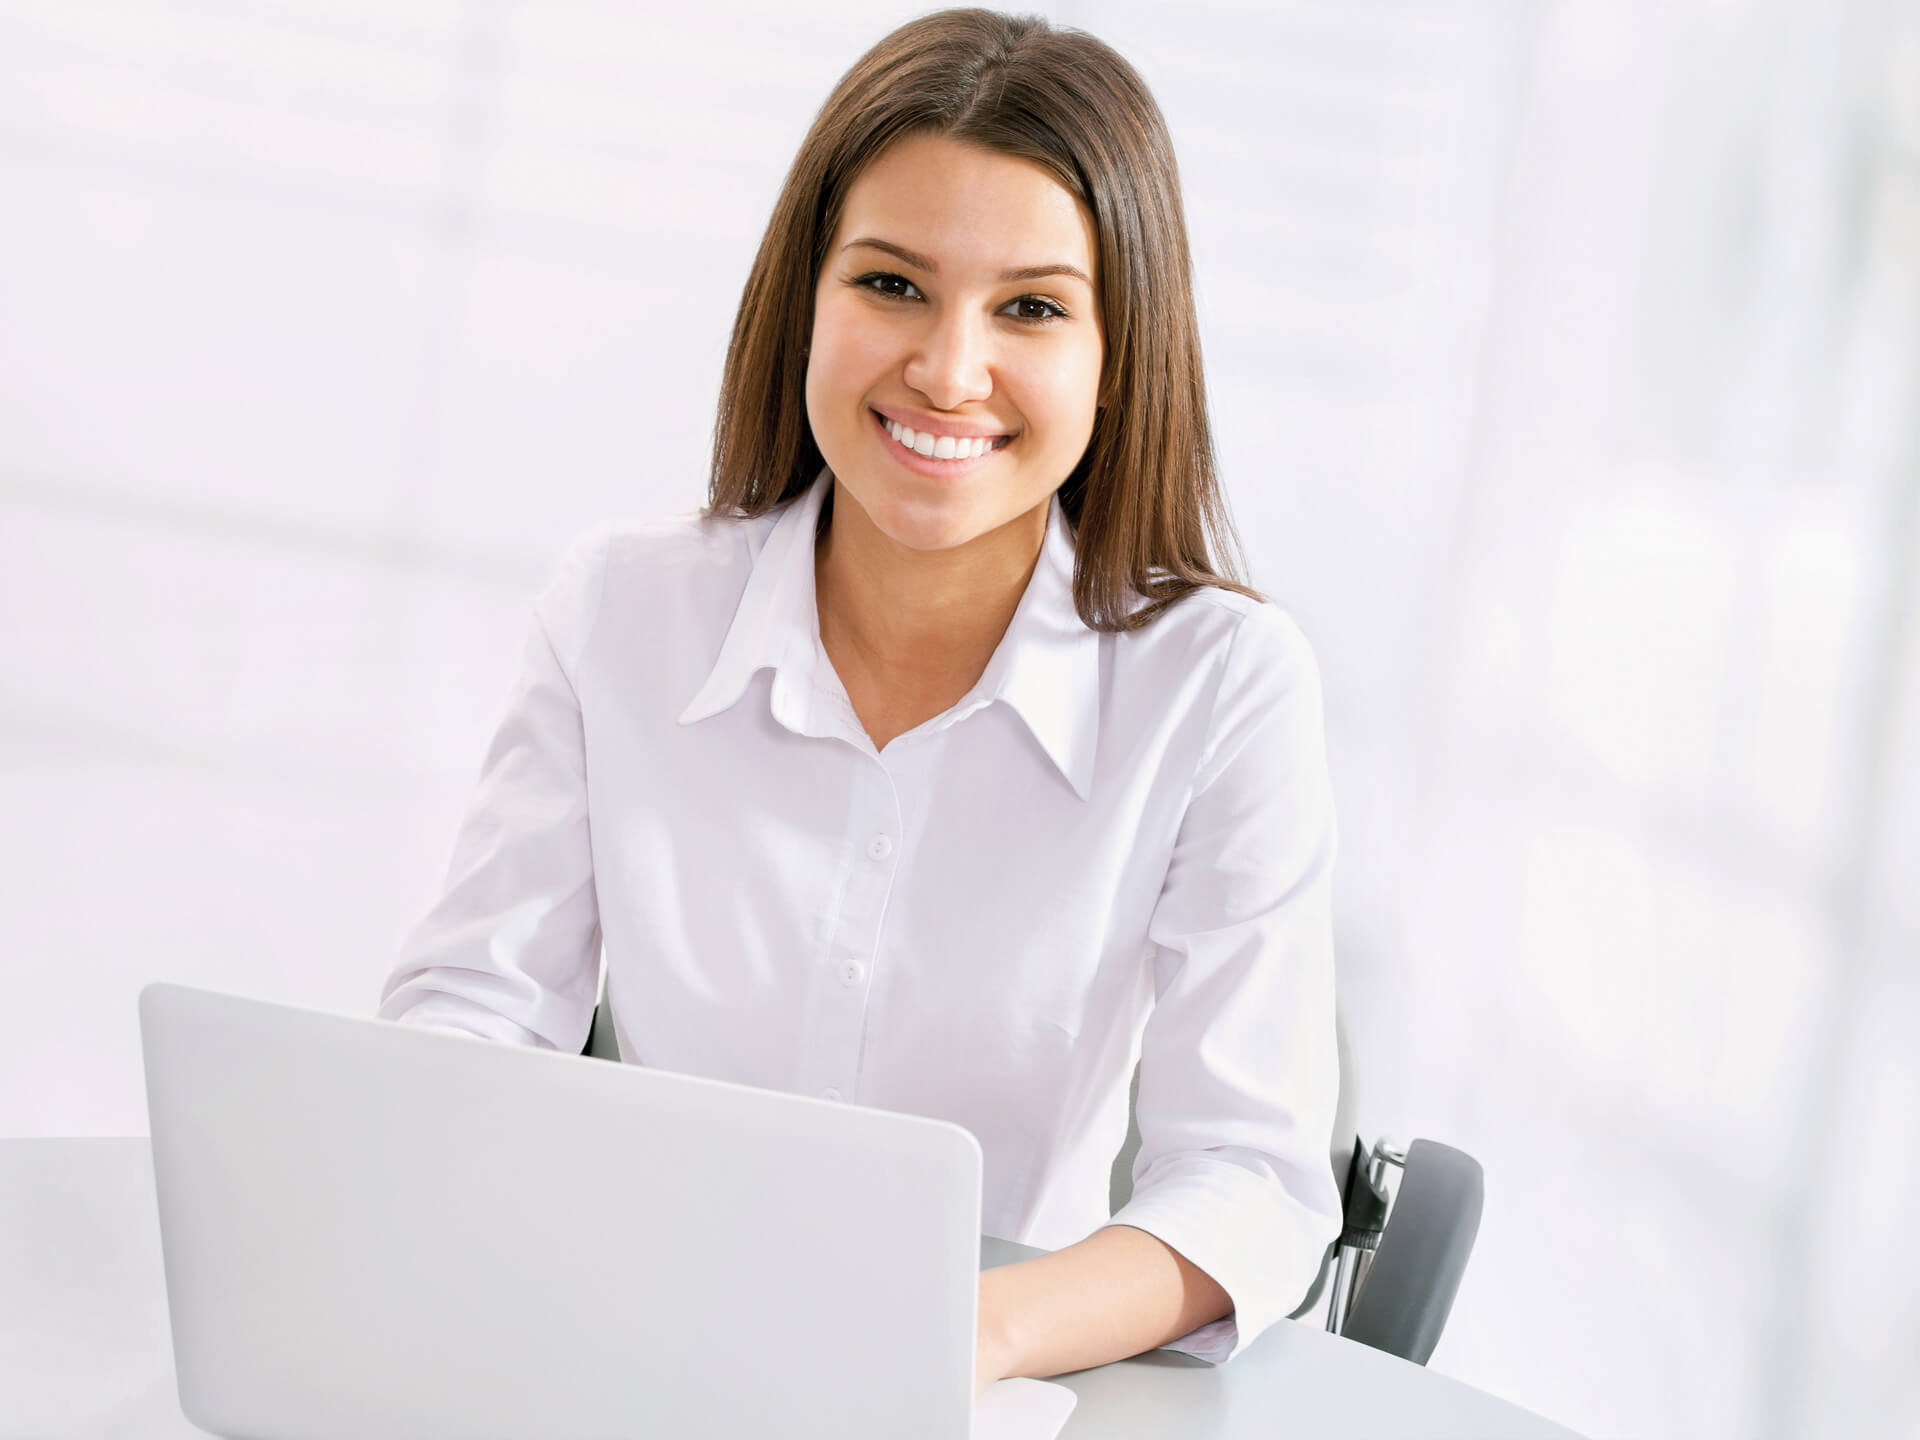 Woman, office, computer work, laptop, smiling, serious, business